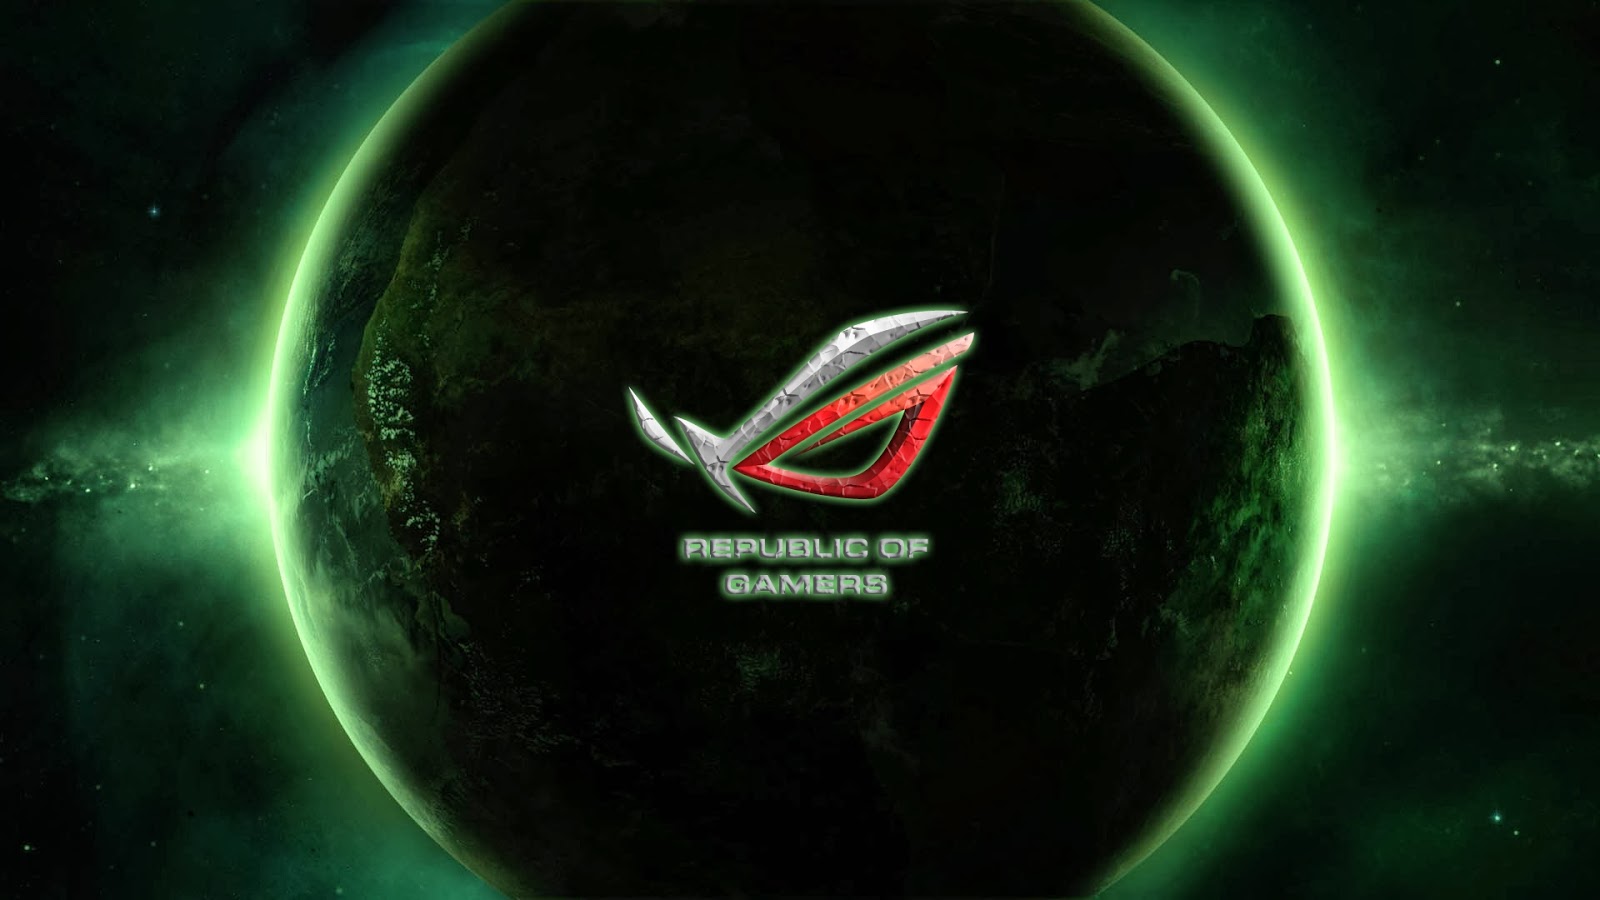 Asus Republic Of Gamers Logo Brand Space Pla Widescreen HD